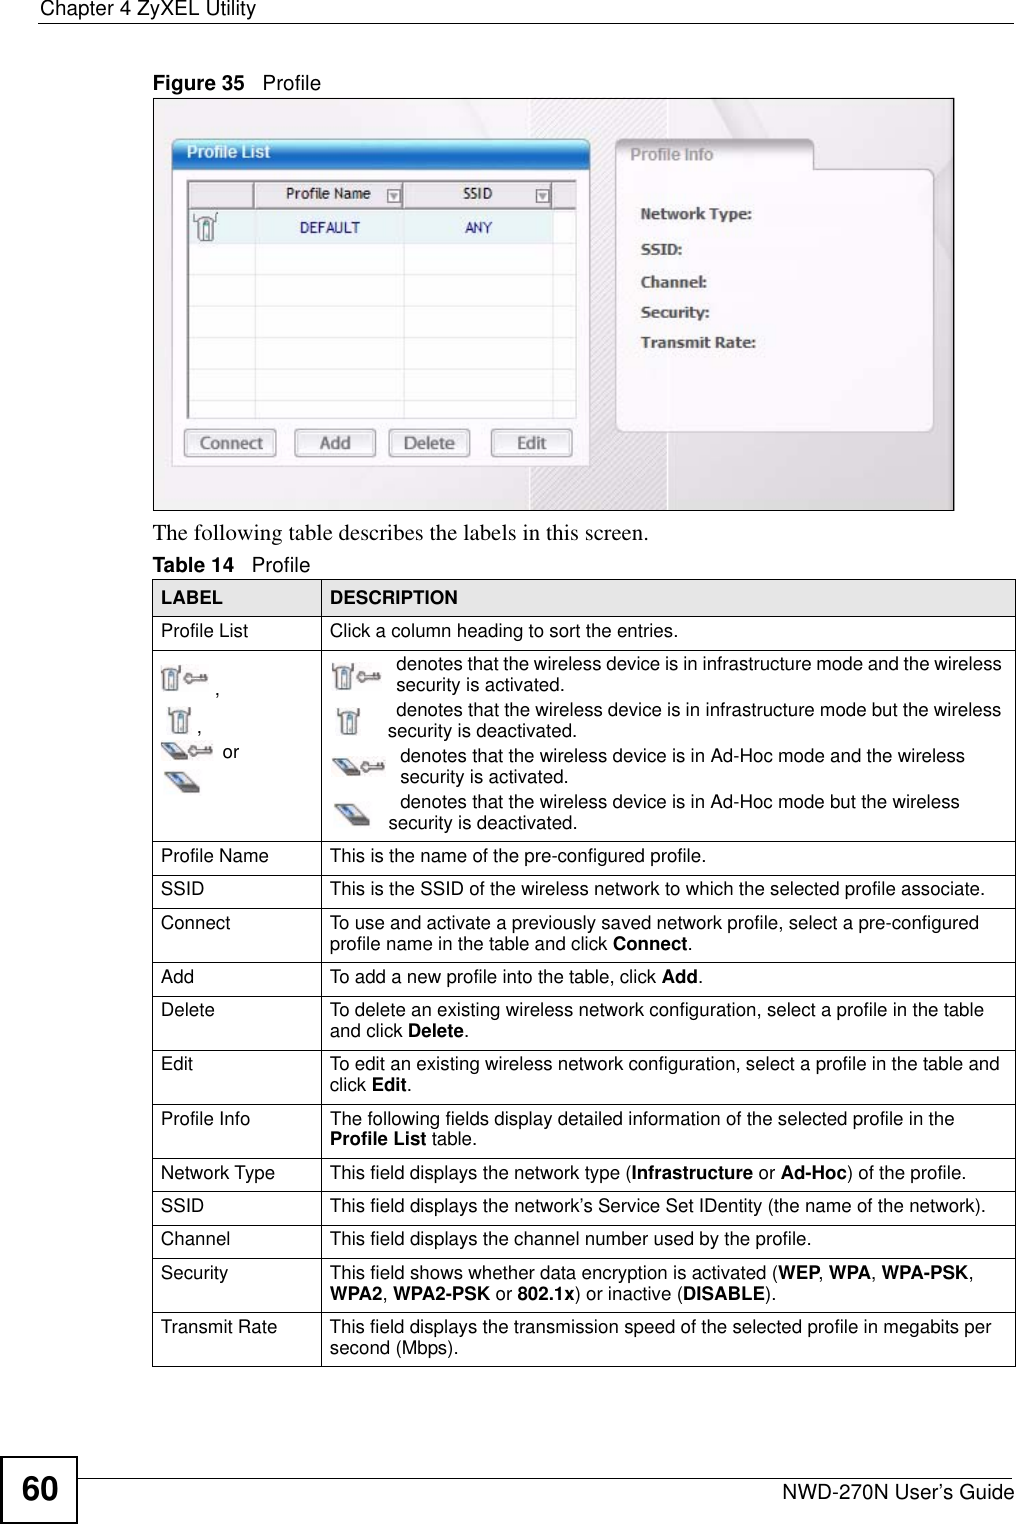 Chapter 4 ZyXEL UtilityNWD-270N User’s Guide60Figure 35   Profile  The following table describes the labels in this screen. Table 14   Profile LABEL DESCRIPTIONProfile List Click a column heading to sort the entries.,, ordenotes that the wireless device is in infrastructure mode and the wireless security is activated.denotes that the wireless device is in infrastructure mode but the wireless security is deactivated.denotes that the wireless device is in Ad-Hoc mode and the wireless security is activated.denotes that the wireless device is in Ad-Hoc mode but the wireless security is deactivated.Profile Name This is the name of the pre-configured profile.SSID This is the SSID of the wireless network to which the selected profile associate.Connect  To use and activate a previously saved network profile, select a pre-configured profile name in the table and click Connect.Add  To add a new profile into the table, click Add.Delete To delete an existing wireless network configuration, select a profile in the table and click Delete.Edit To edit an existing wireless network configuration, select a profile in the table and click Edit.Profile Info The following fields display detailed information of the selected profile in the Profile List table.Network Type This field displays the network type (Infrastructure or Ad-Hoc) of the profile.SSID This field displays the network’s Service Set IDentity (the name of the network).Channel This field displays the channel number used by the profile.Security This field shows whether data encryption is activated (WEP, WPA, WPA-PSK, WPA2, WPA2-PSK or 802.1x) or inactive (DISABLE).Transmit Rate This field displays the transmission speed of the selected profile in megabits per second (Mbps).